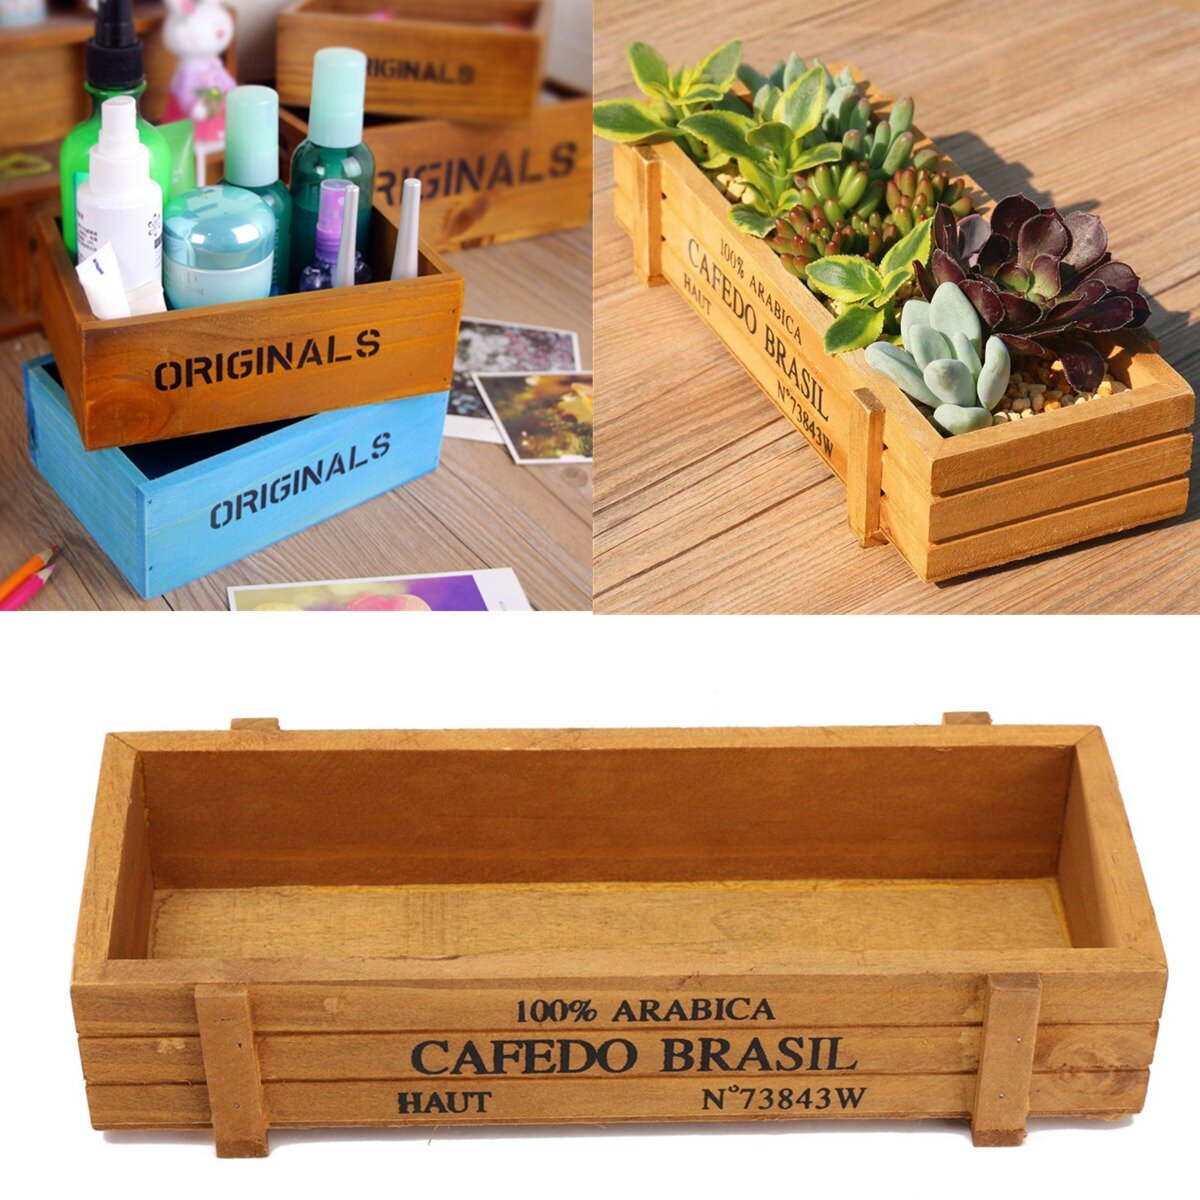 Rustic Antique Vintage Handmade Wooden Boxes/Crates Trugs Kitchen Storage Container